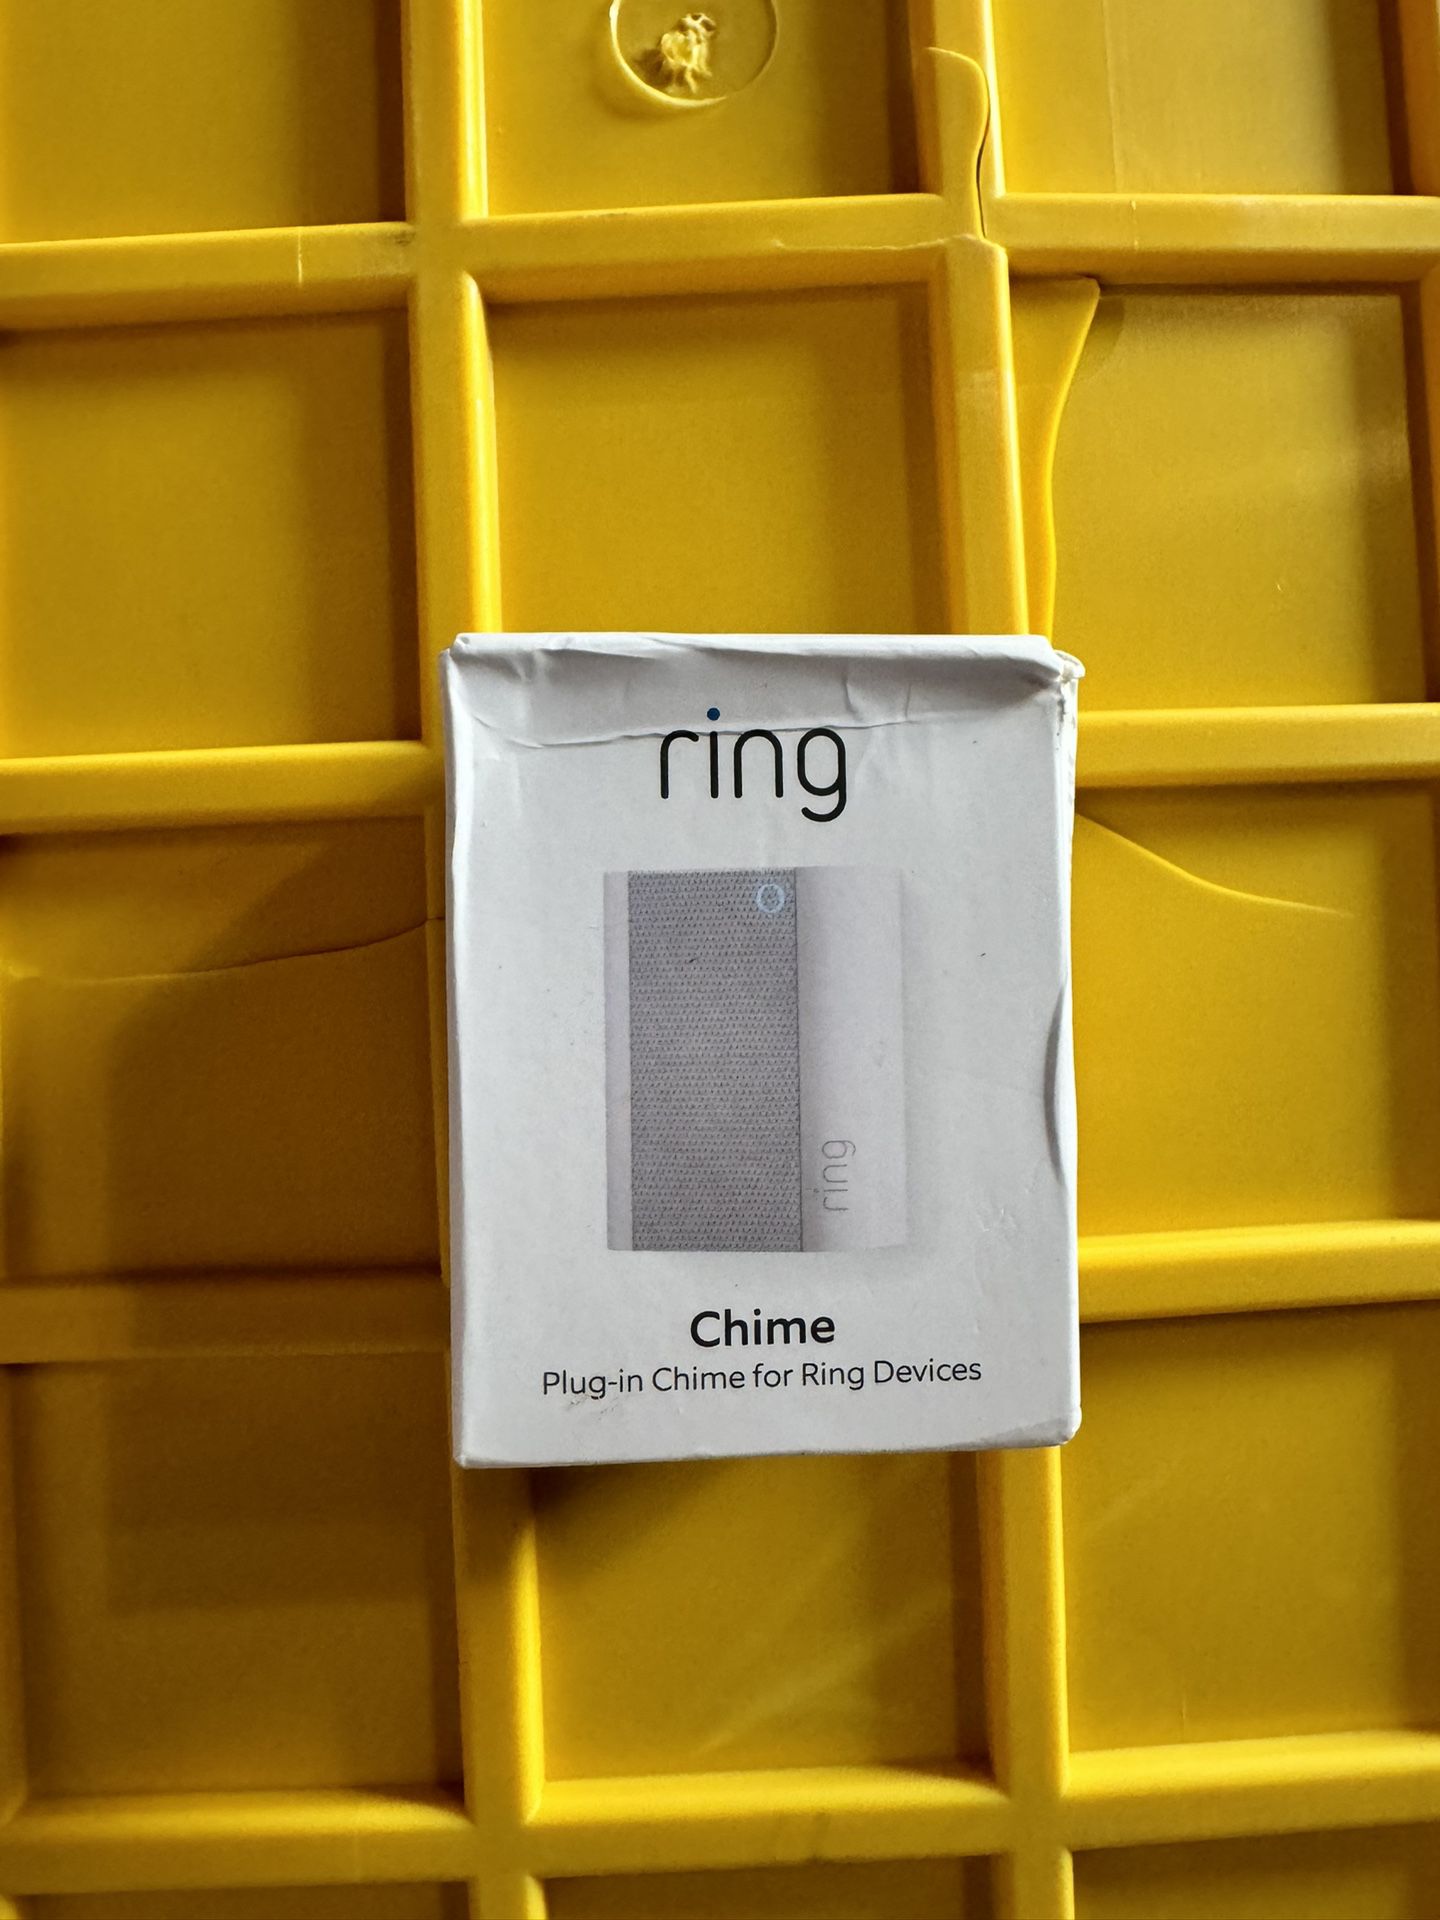 Ring Chime for Ring video doorbells and cameras